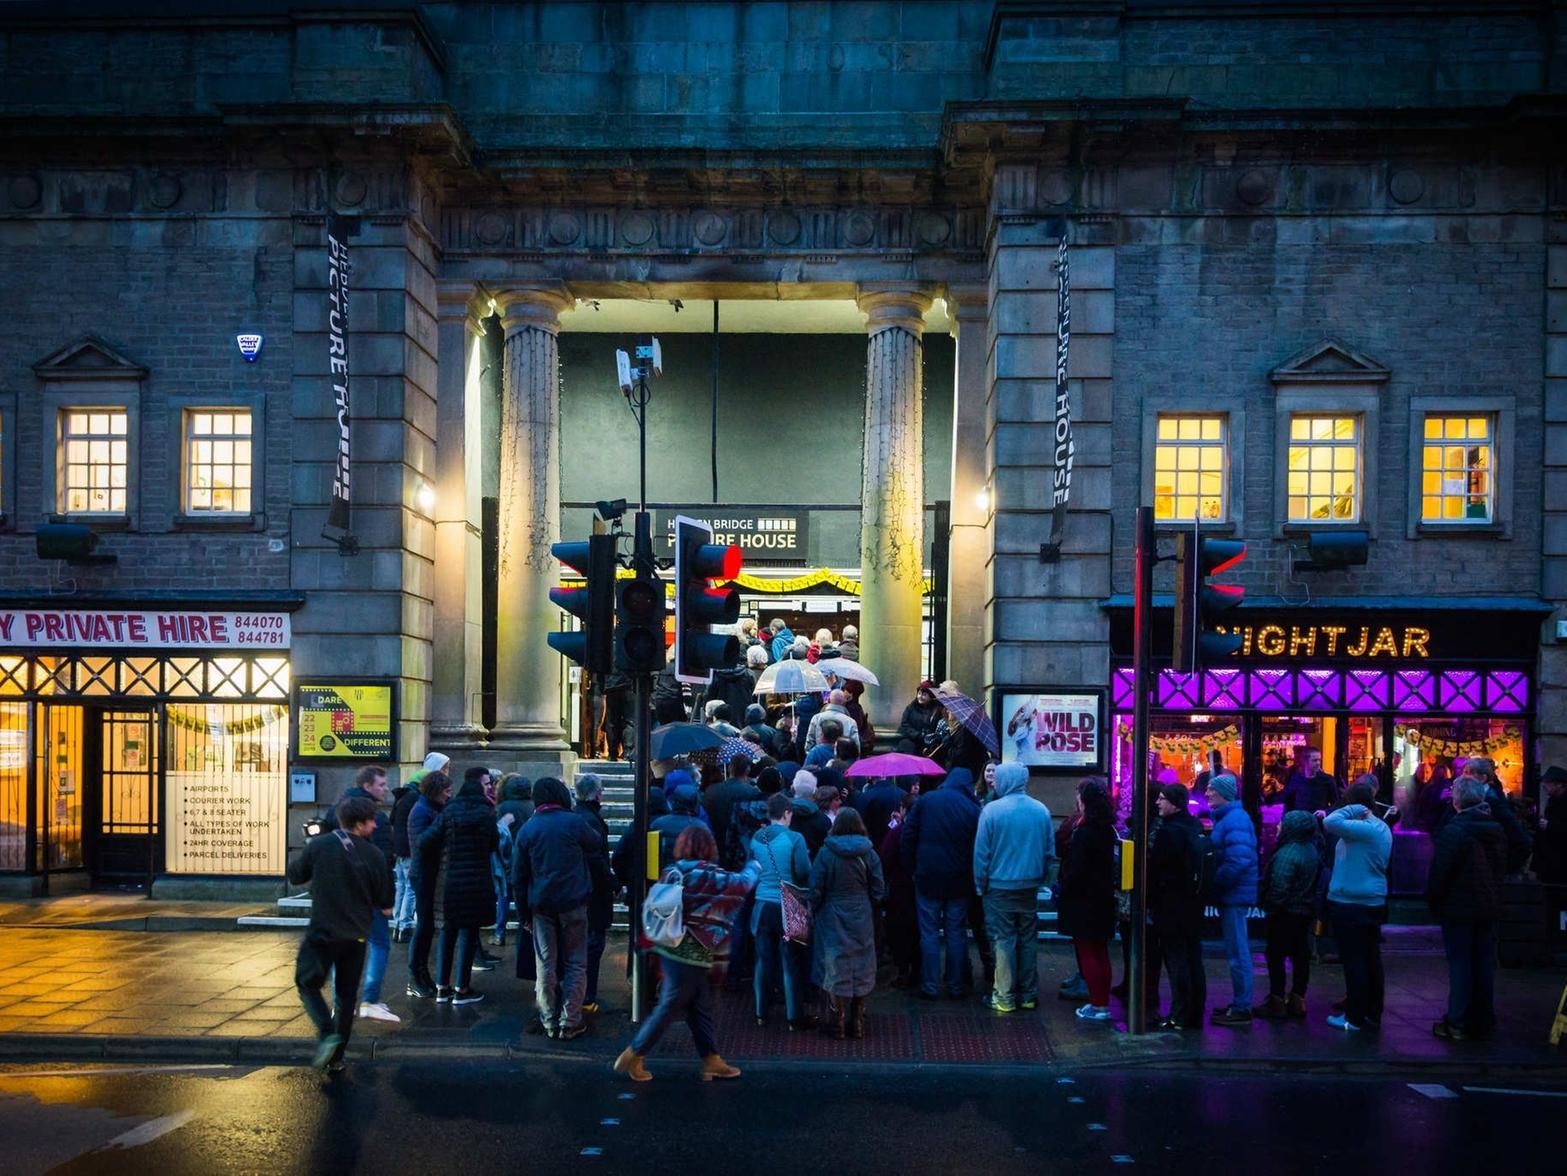 Hebden Bridge Film Festival will be making a return in March from 27 to 29. The weekend will showcase a range of exciting new films as well as talks with people from the industry.